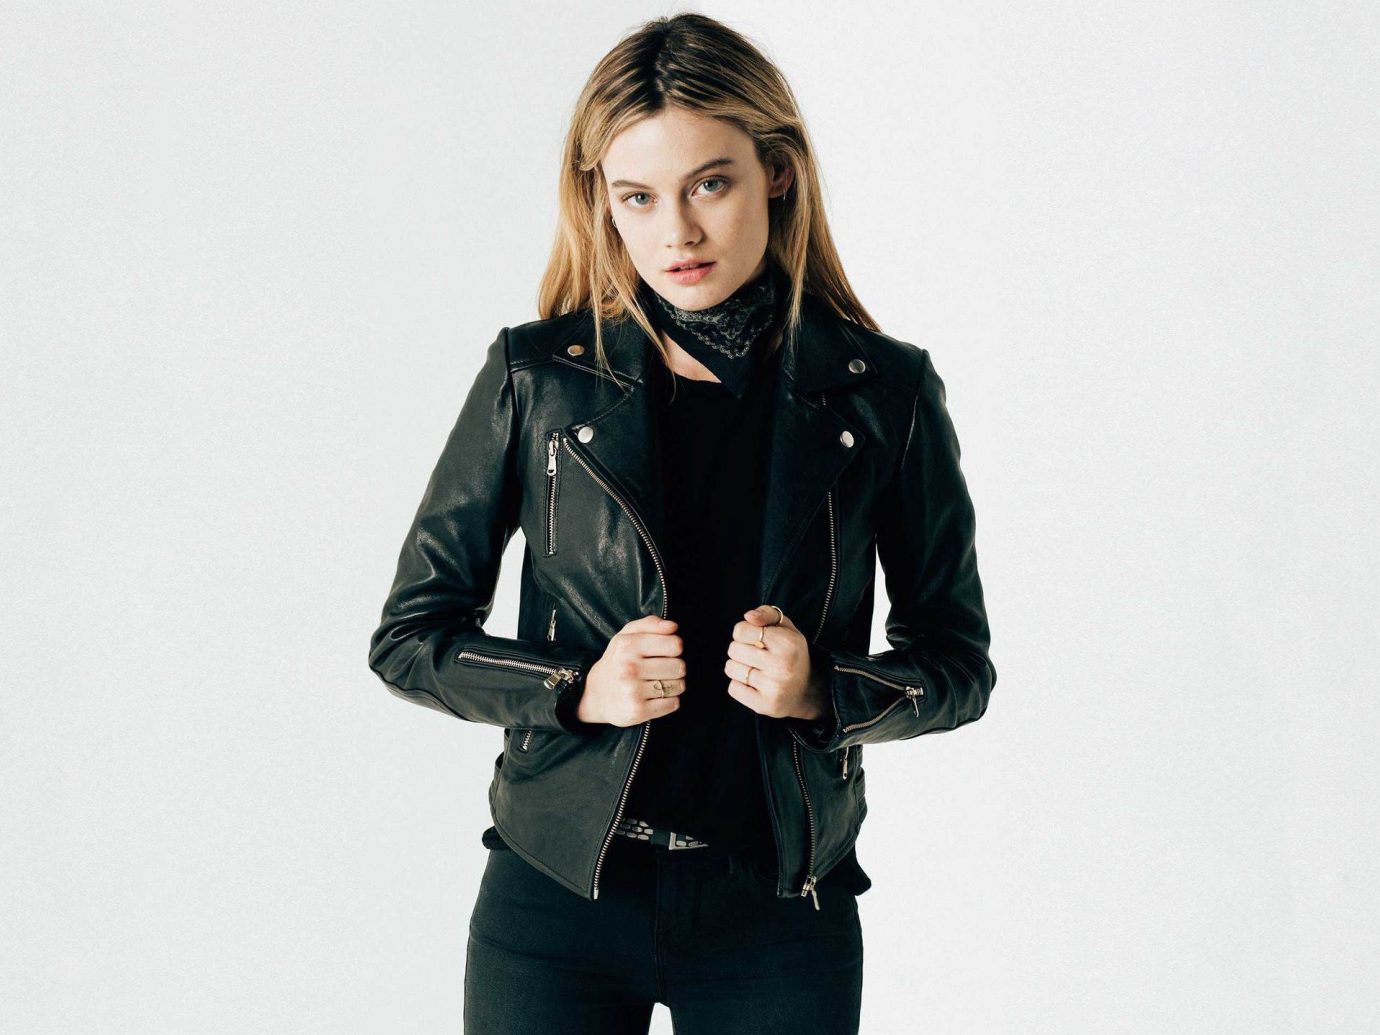 Style + Design person clothing jacket woman leather leather jacket overcoat outerwear textile sleeve collar coat fur material blazer suit posing